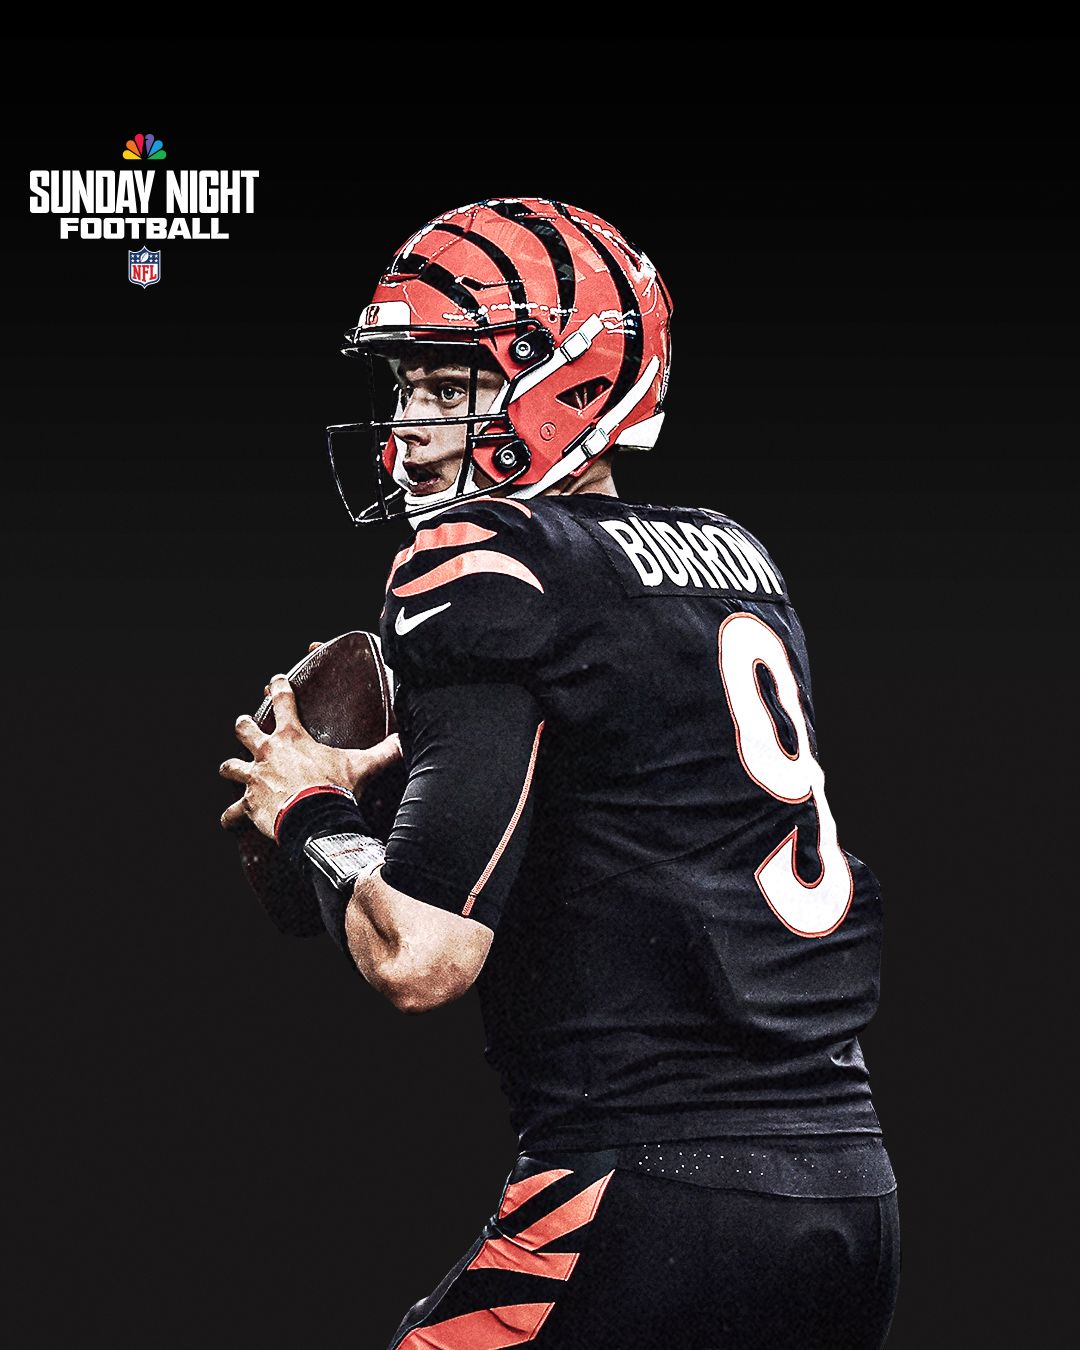 Sunday Night Football on NBC on X: '#RuleTheJungle vs. #RavensFlock on Sunday  Night Football. Who ya got?! LIKE for Bengals RETWEET for Ravens   / X